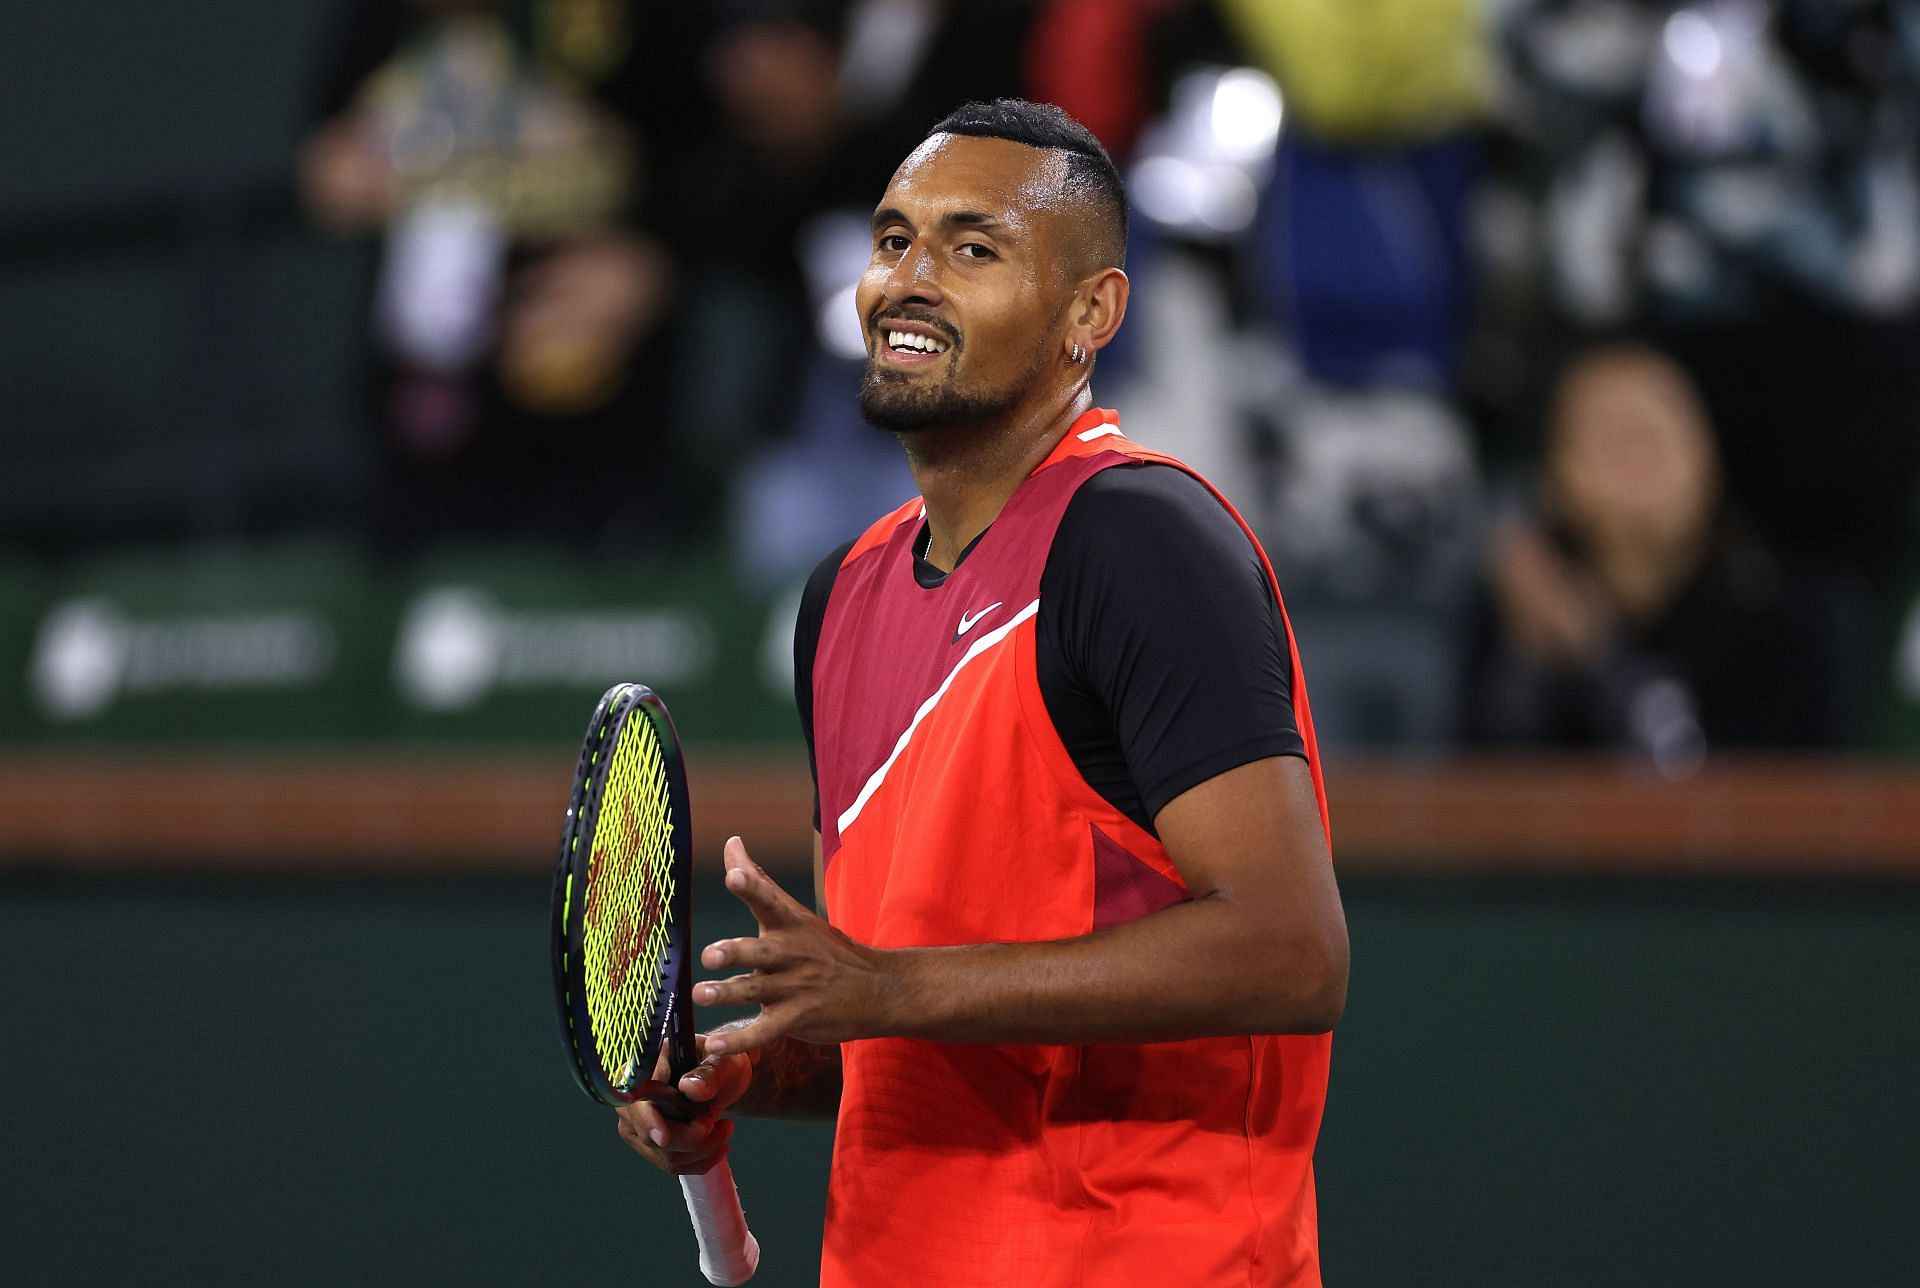 Nick Kyrgios at the 2022 Indian Wells Open